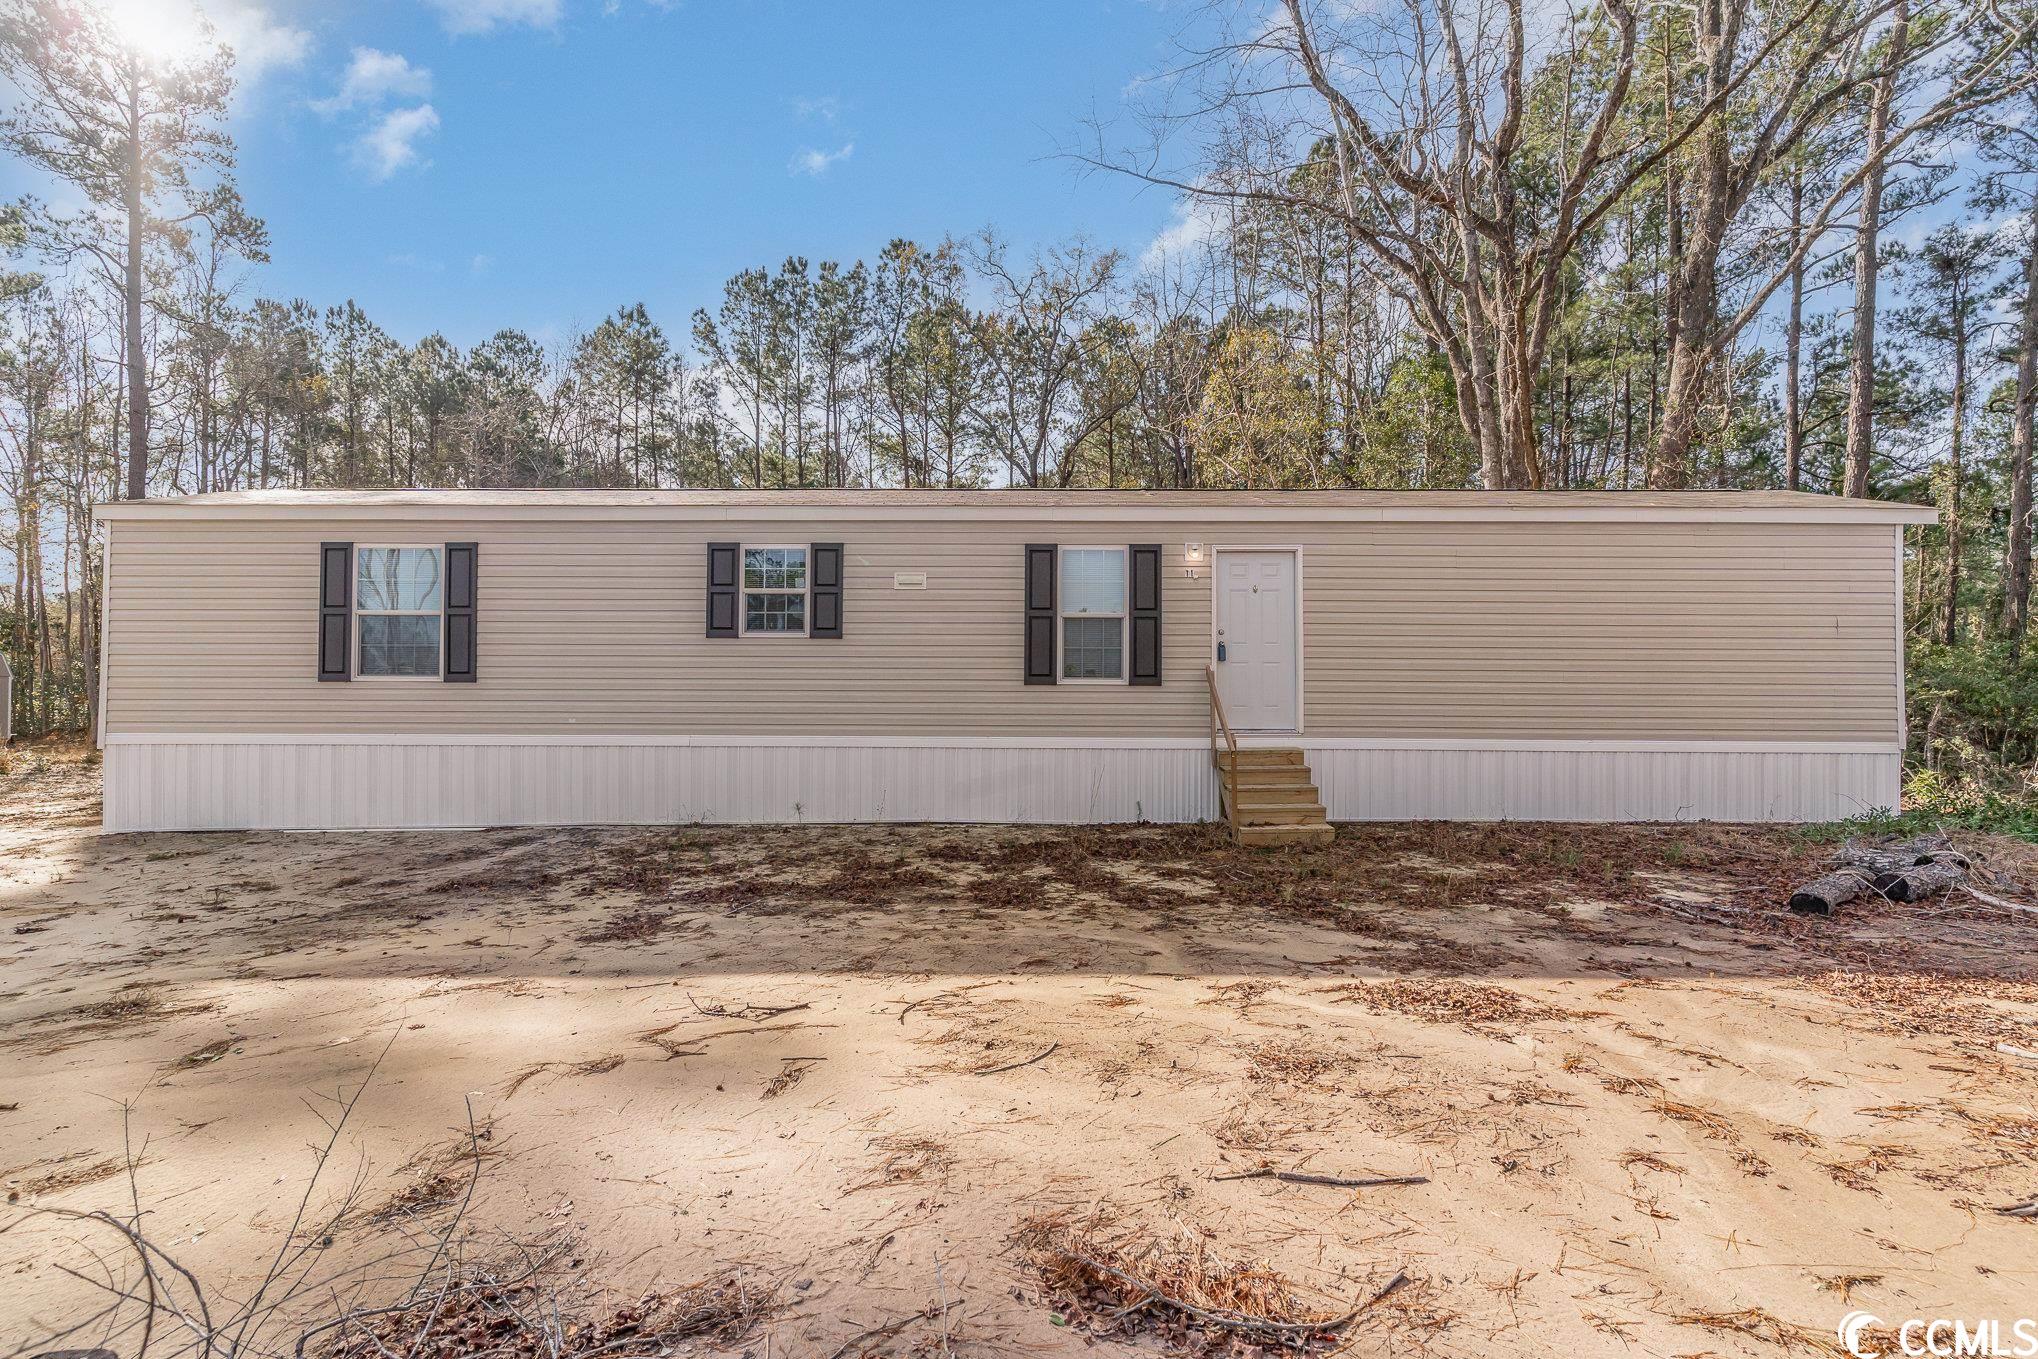 View Little River, SC 29566 mobile home